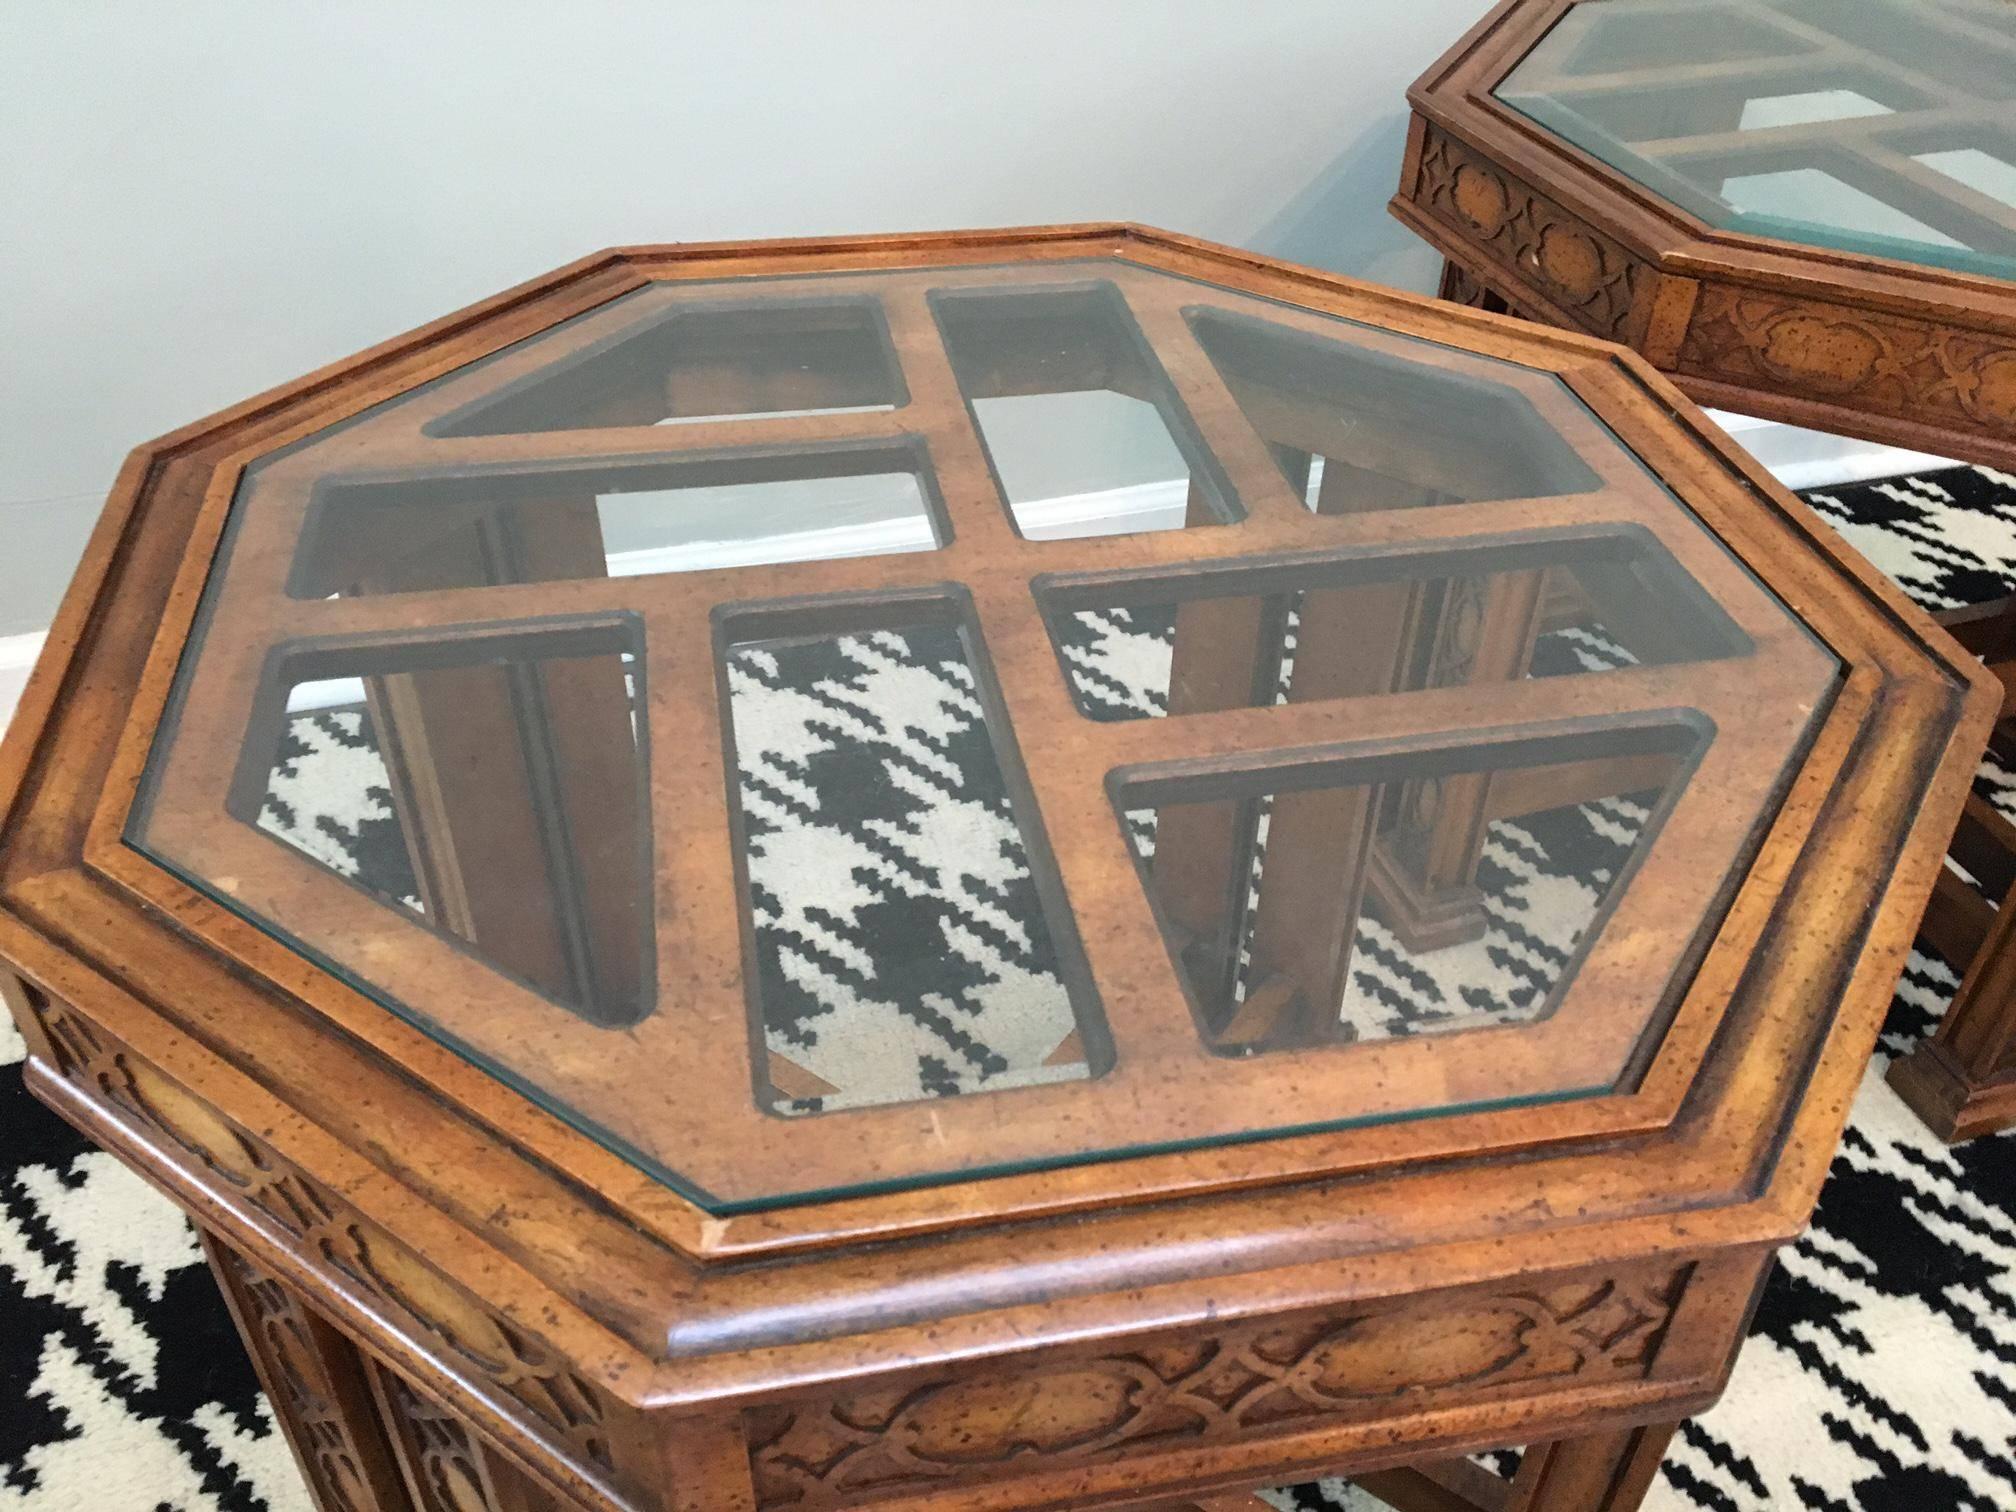 Rare octagon Henredon end tables in Chinese chinoiserie or Chippendale style. Glass tops inset on fretwork. Carved detailing on double legs. Excellent vintage condition.